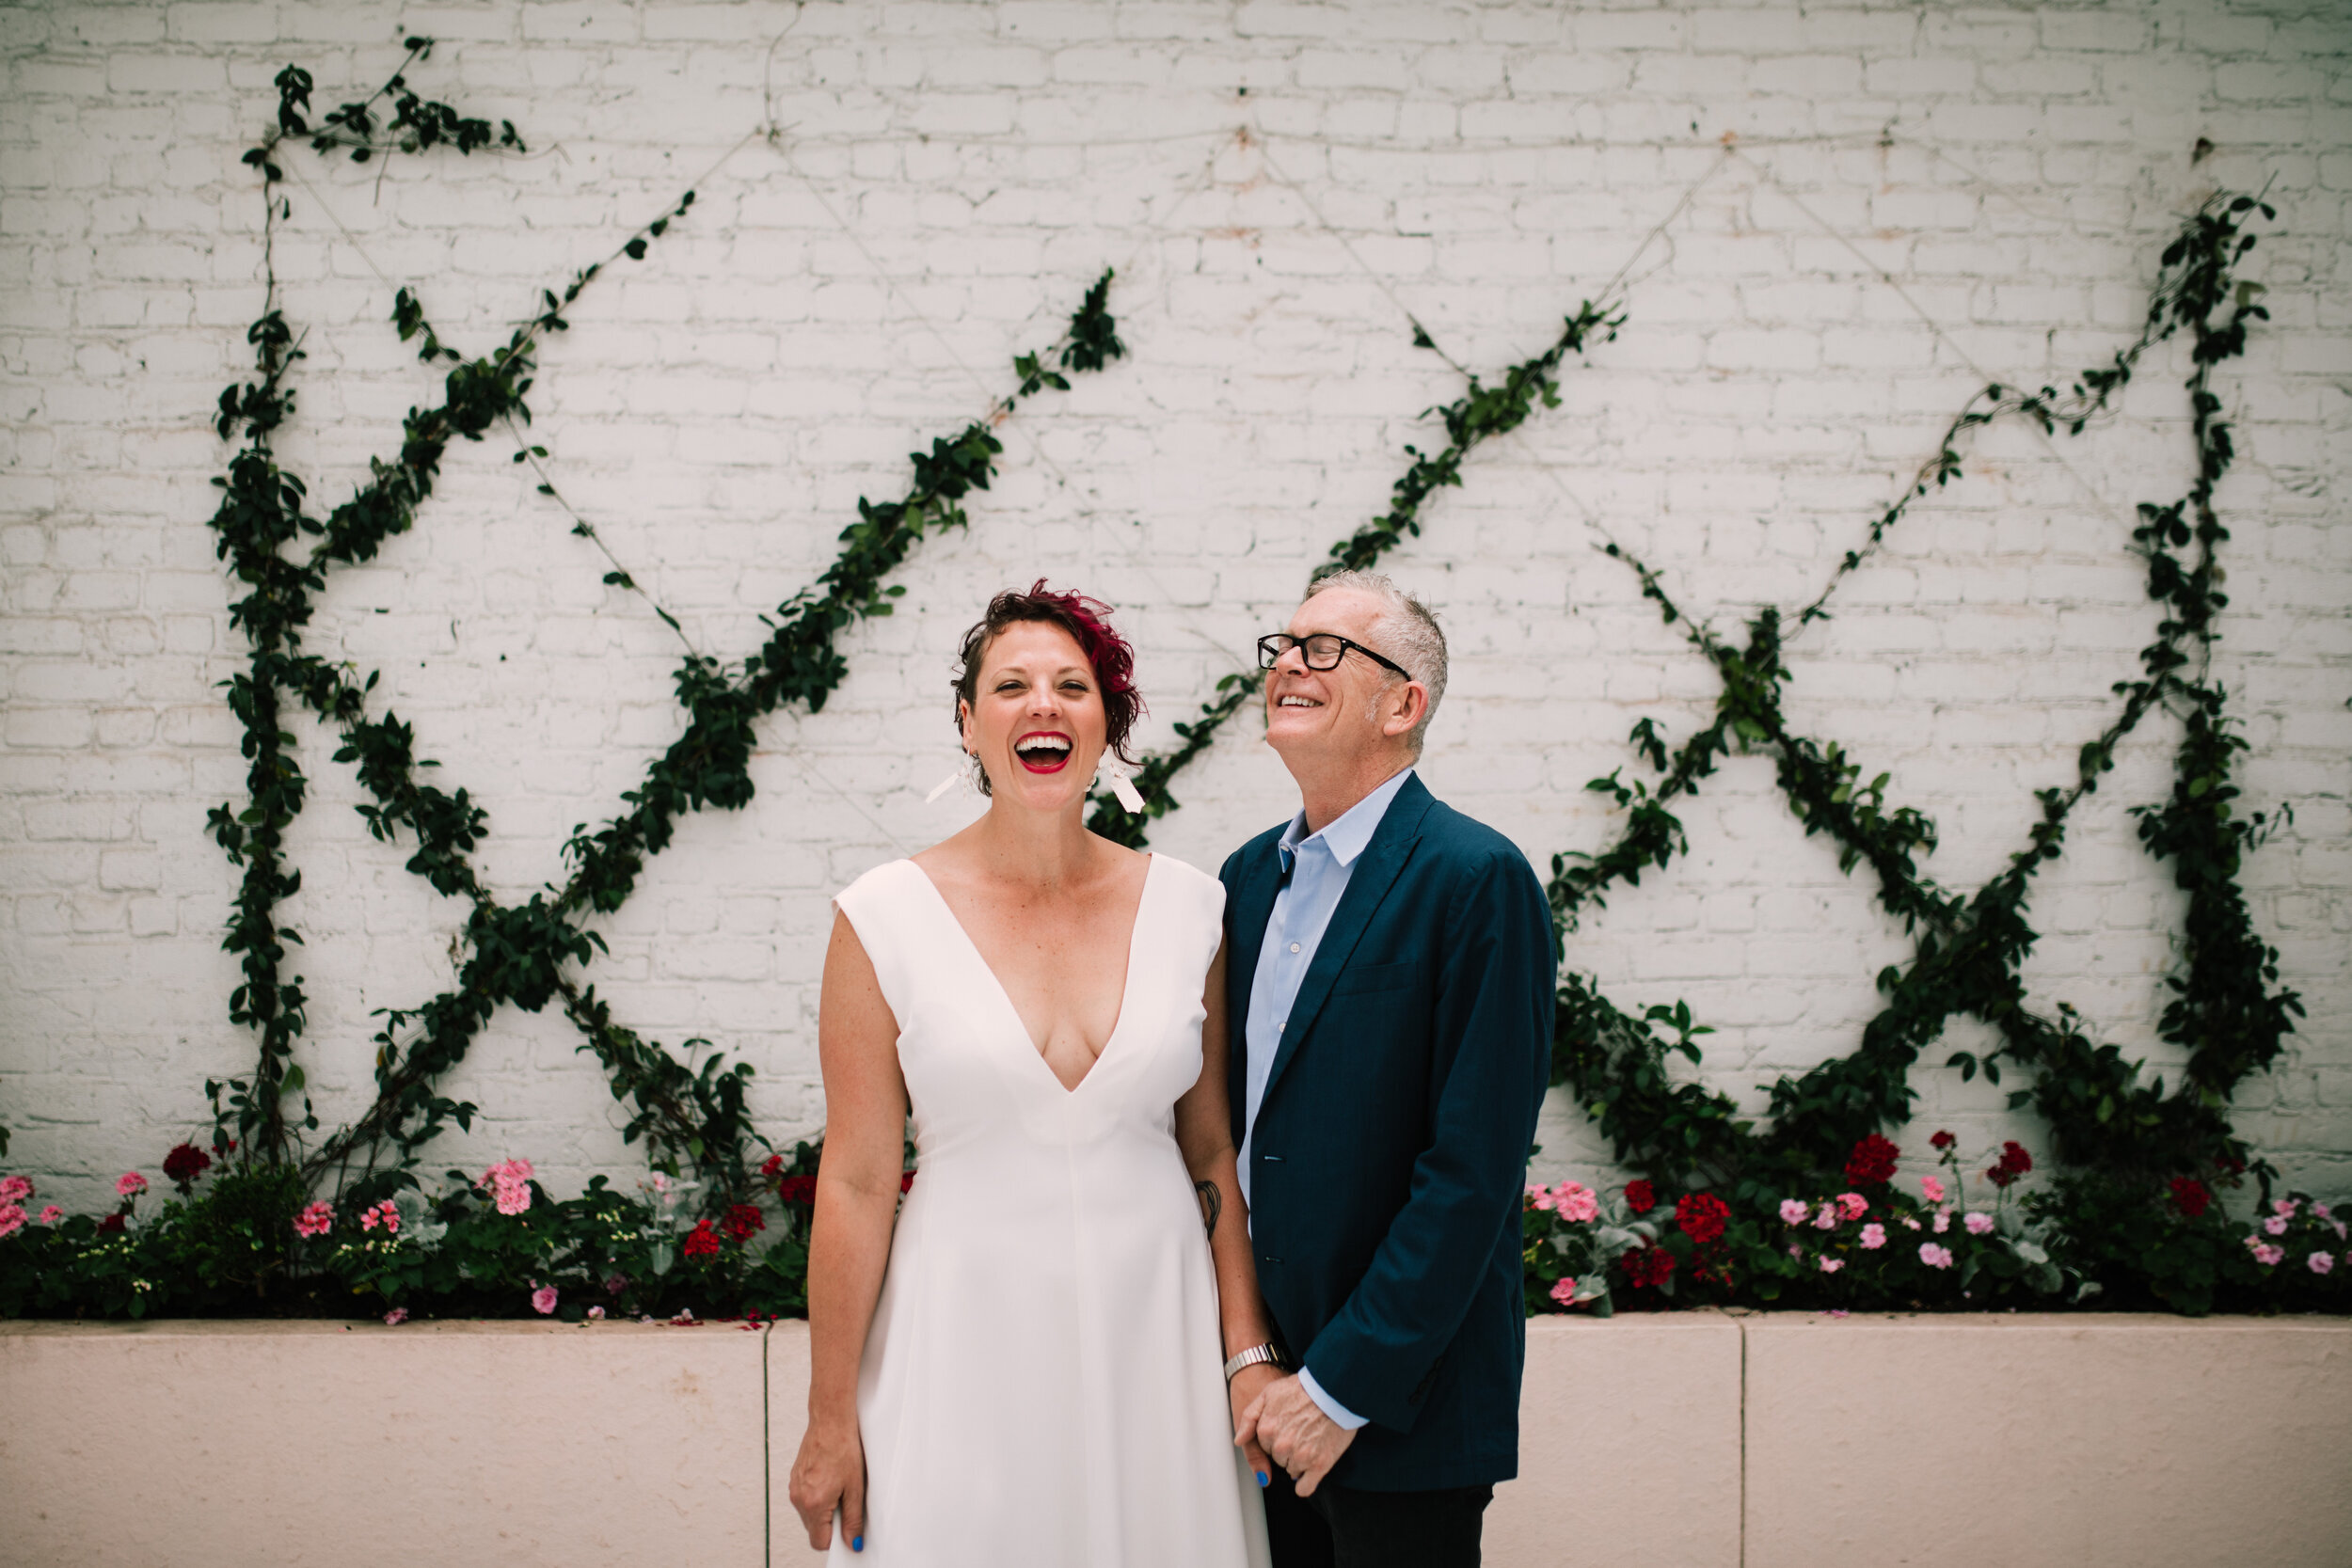 Bride and groom holding hands and smiling in the Quirk Hotel courtyard RVA Shawnee Custalow Queer Wedding Photographer